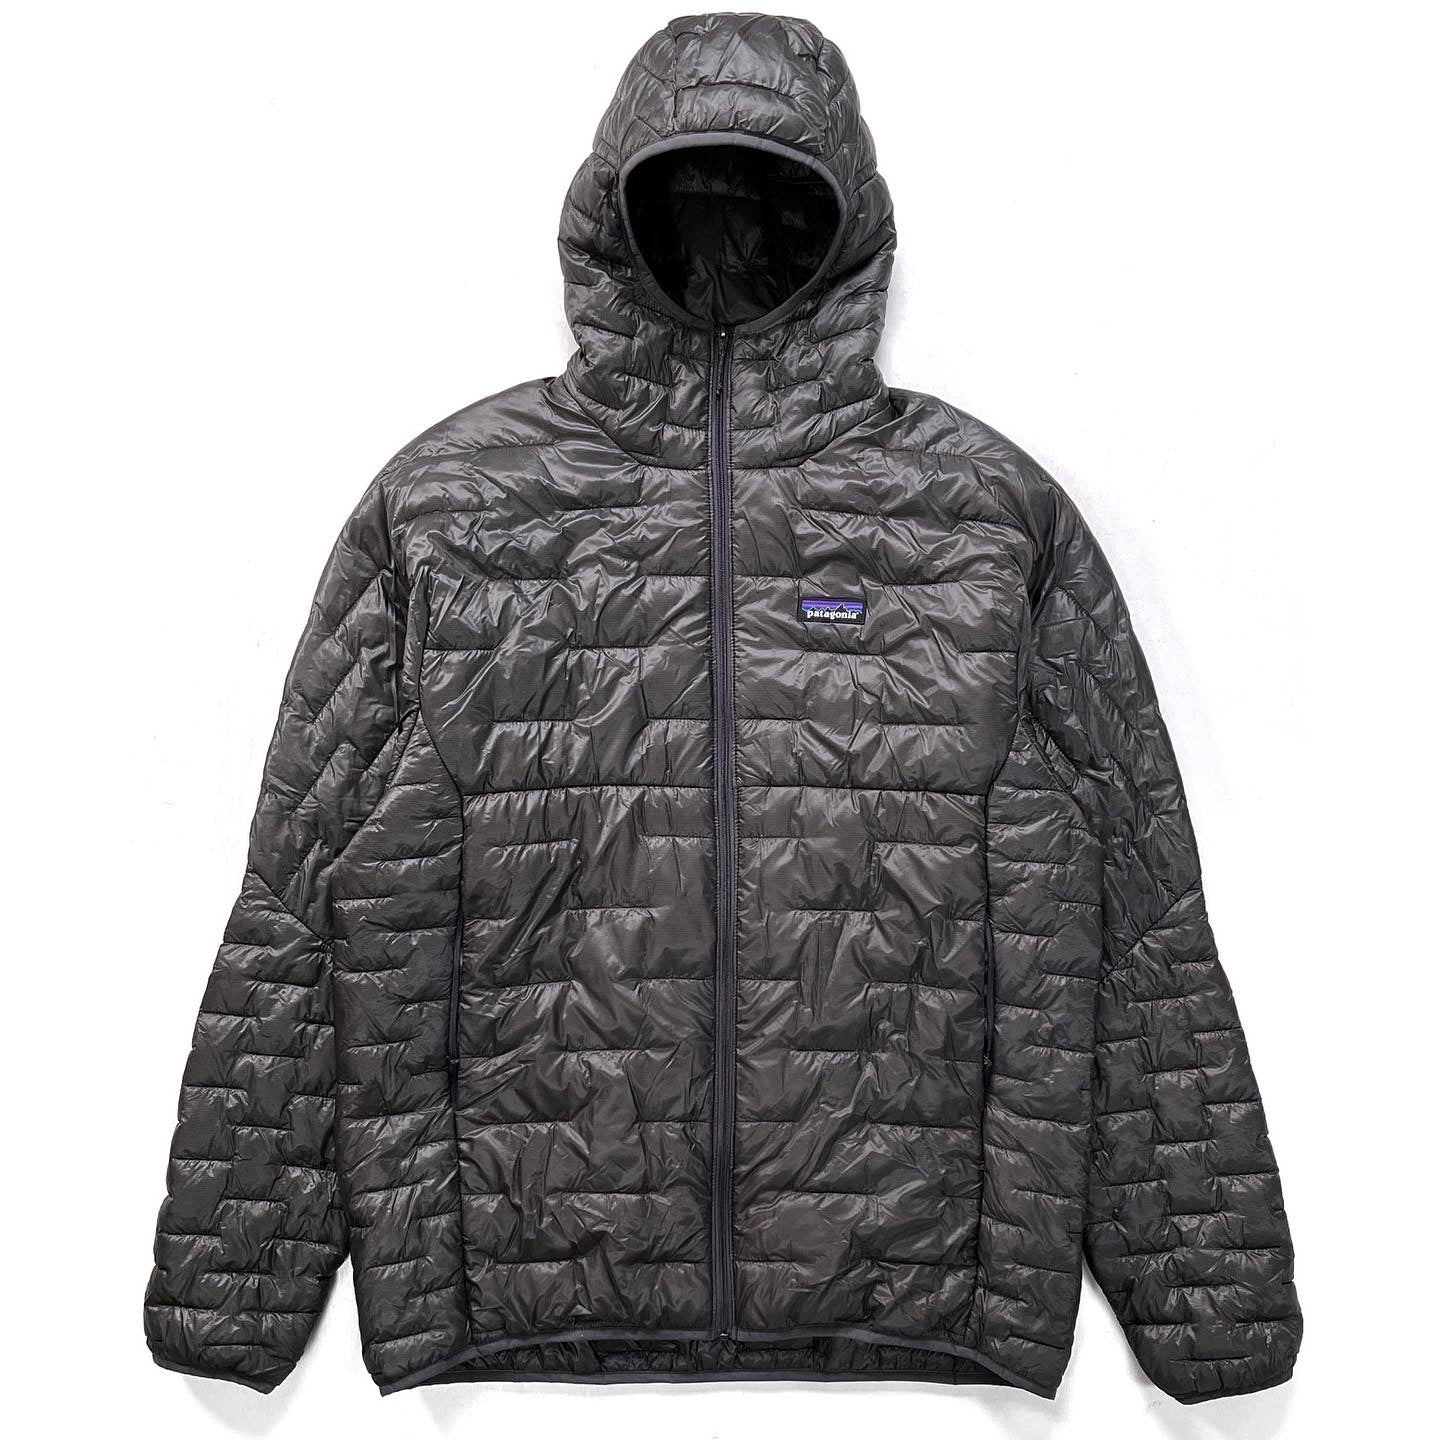 2019 Patagonia Mens Micro Puff Insulated Hoodie, Forge Grey (L)